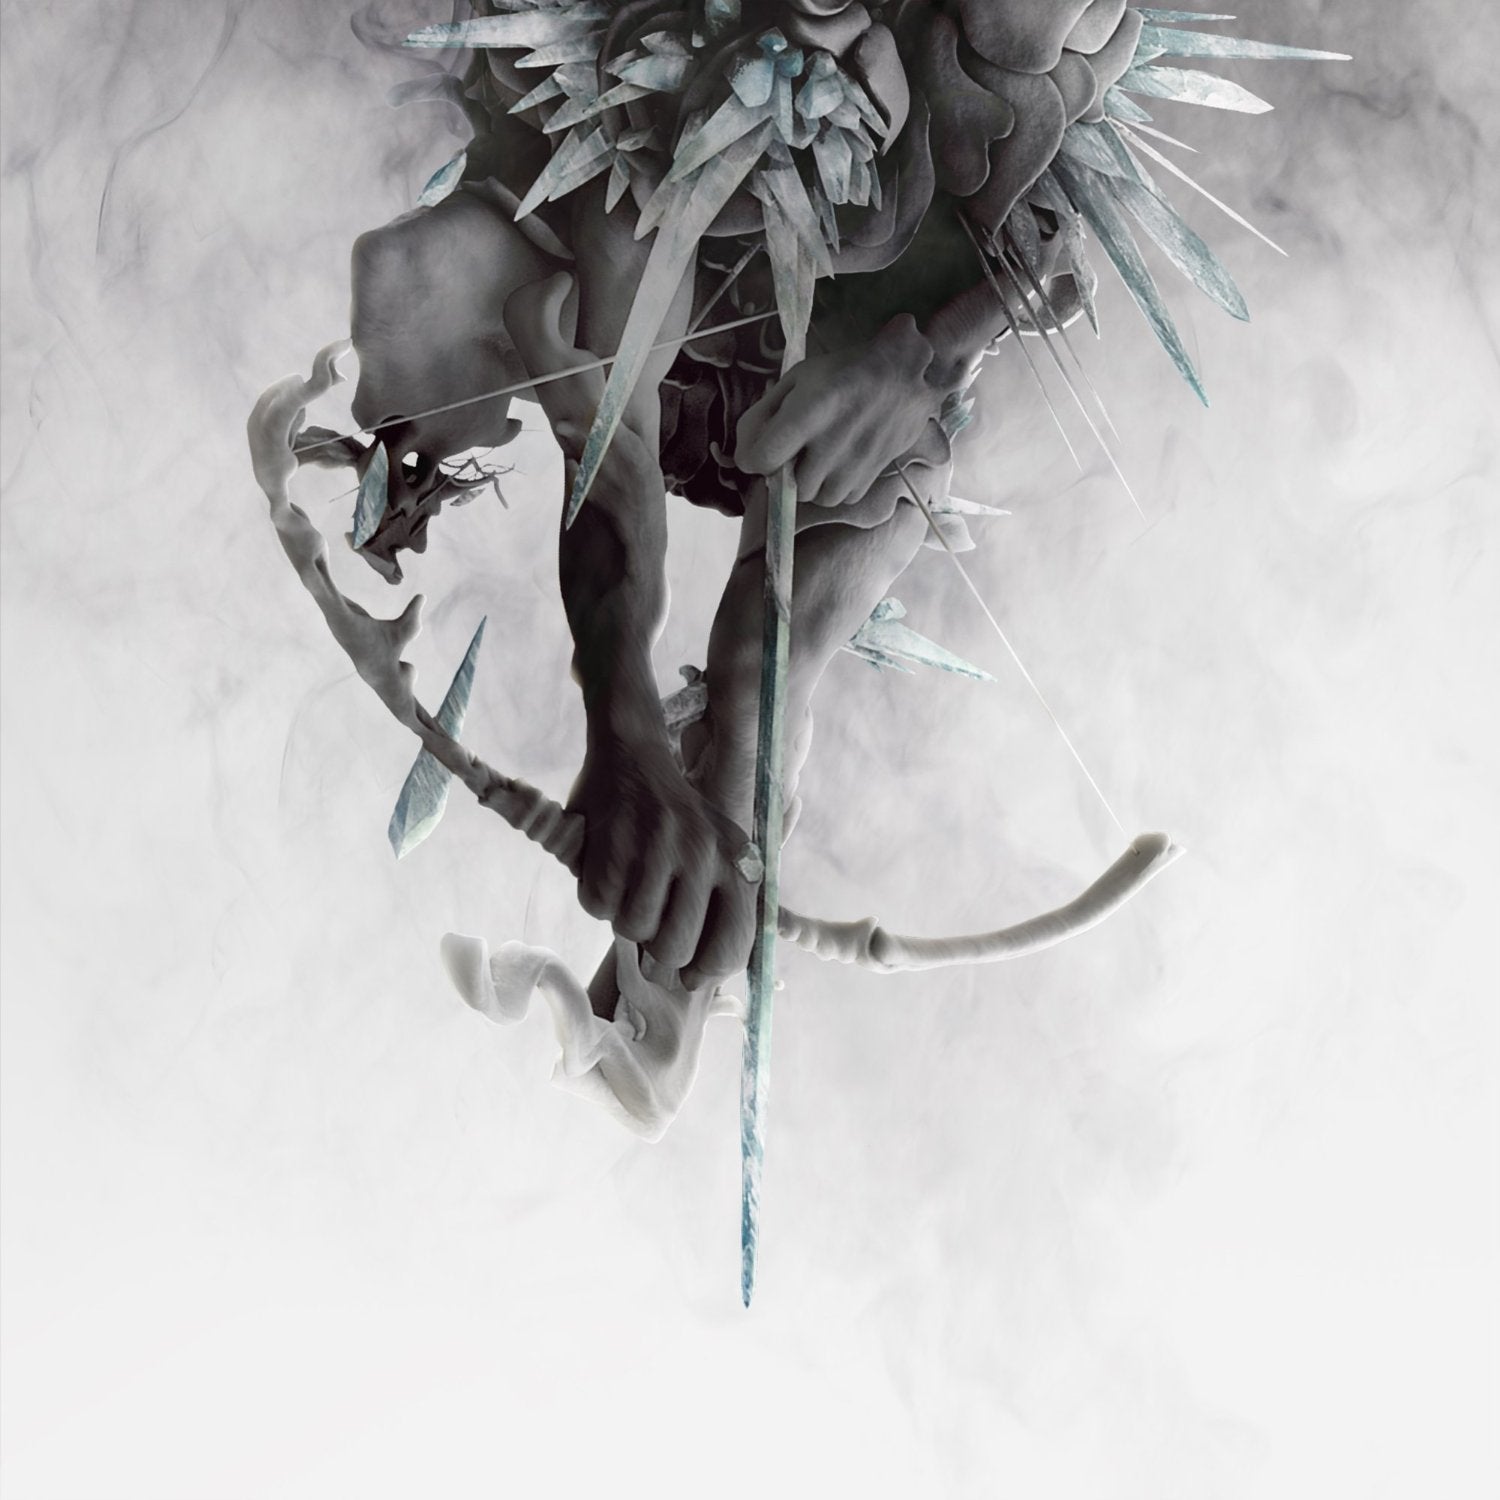 Linkin Park "The Hunting Party" CD